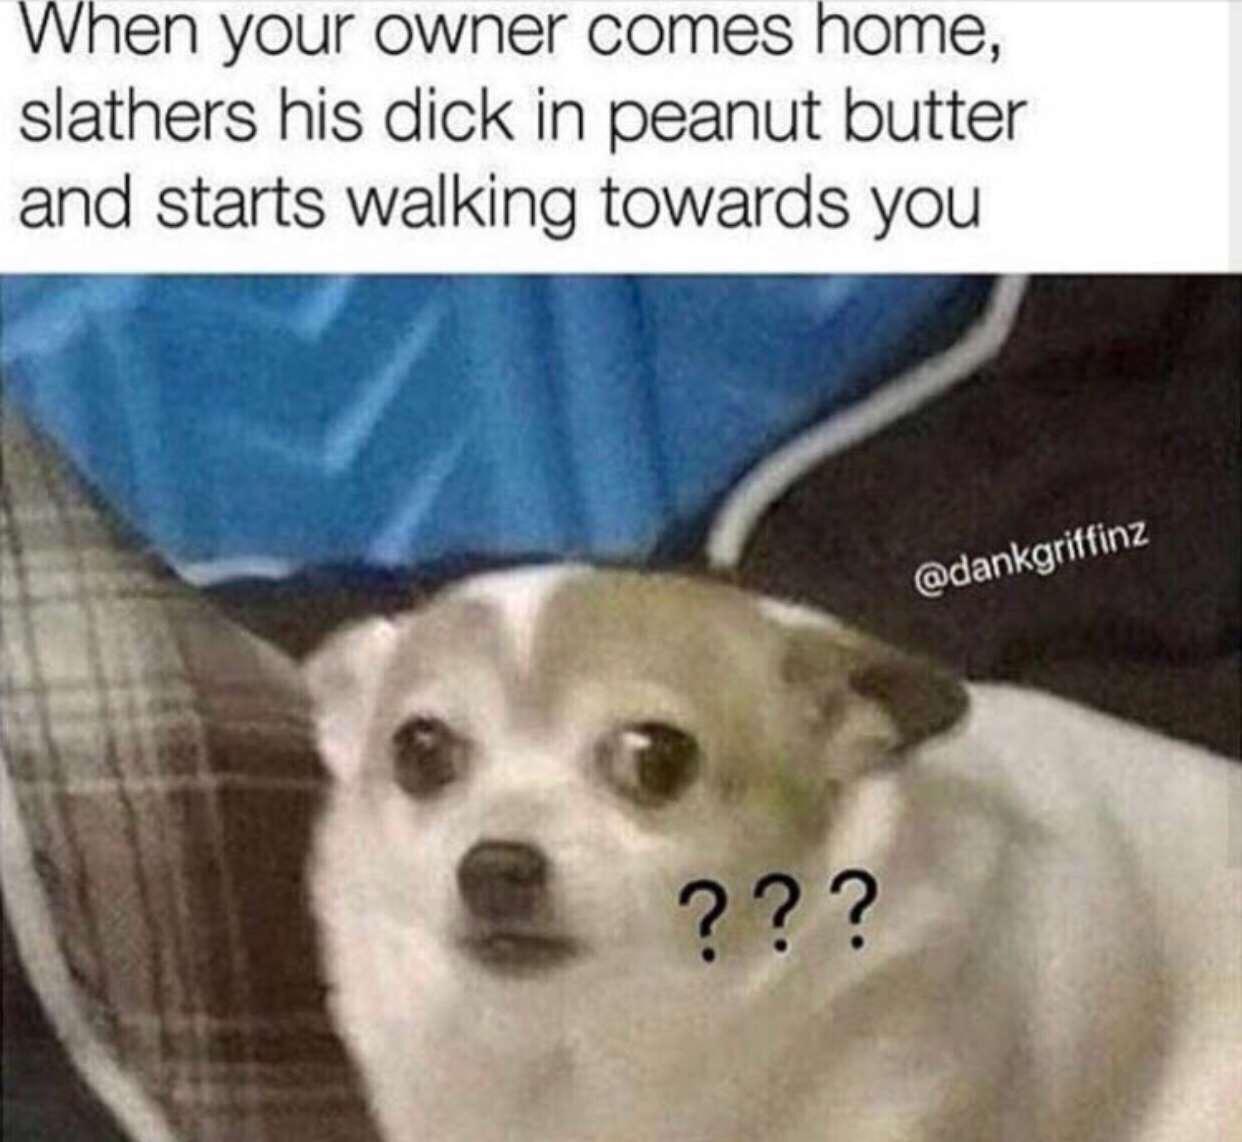 do i get weed chihuahua - When your owner comes home, slathers his dick in peanut butter and starts walking towards you ???